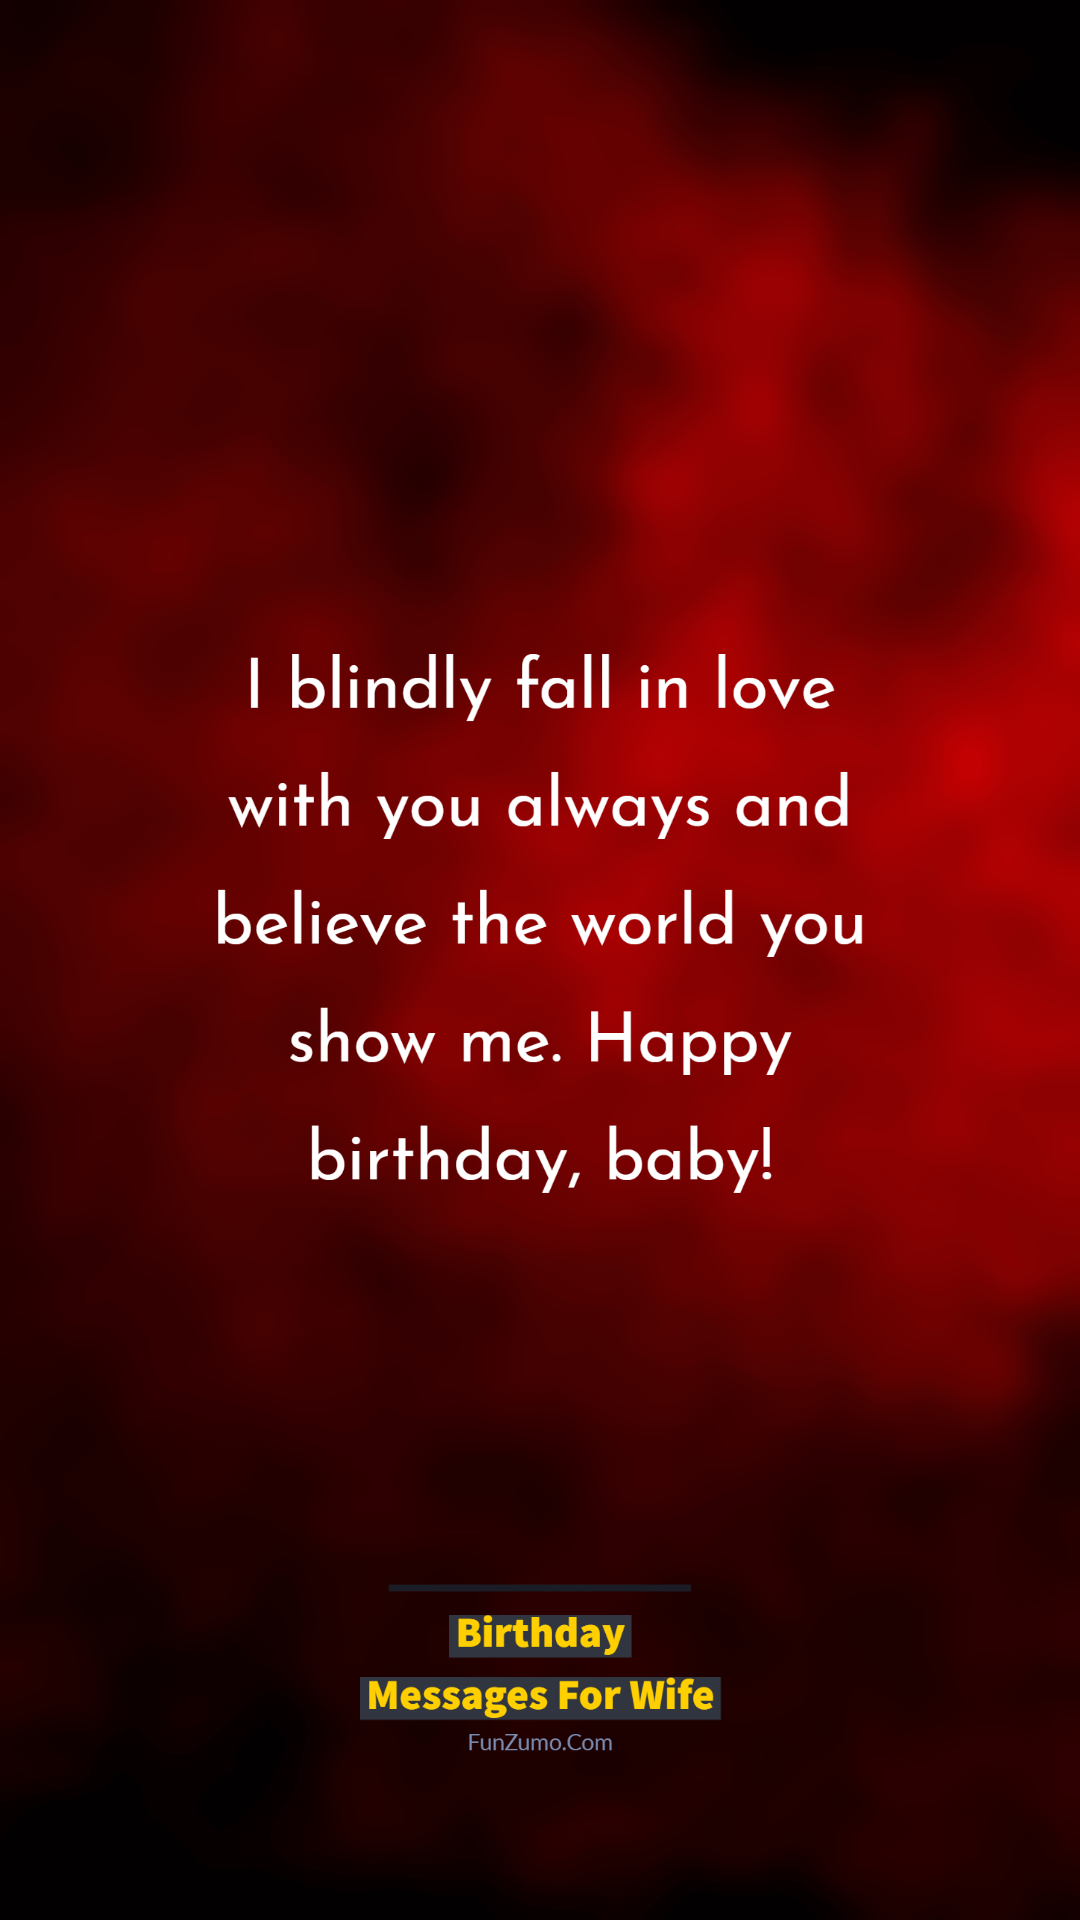 happy birthday wishes messages quotes for wife